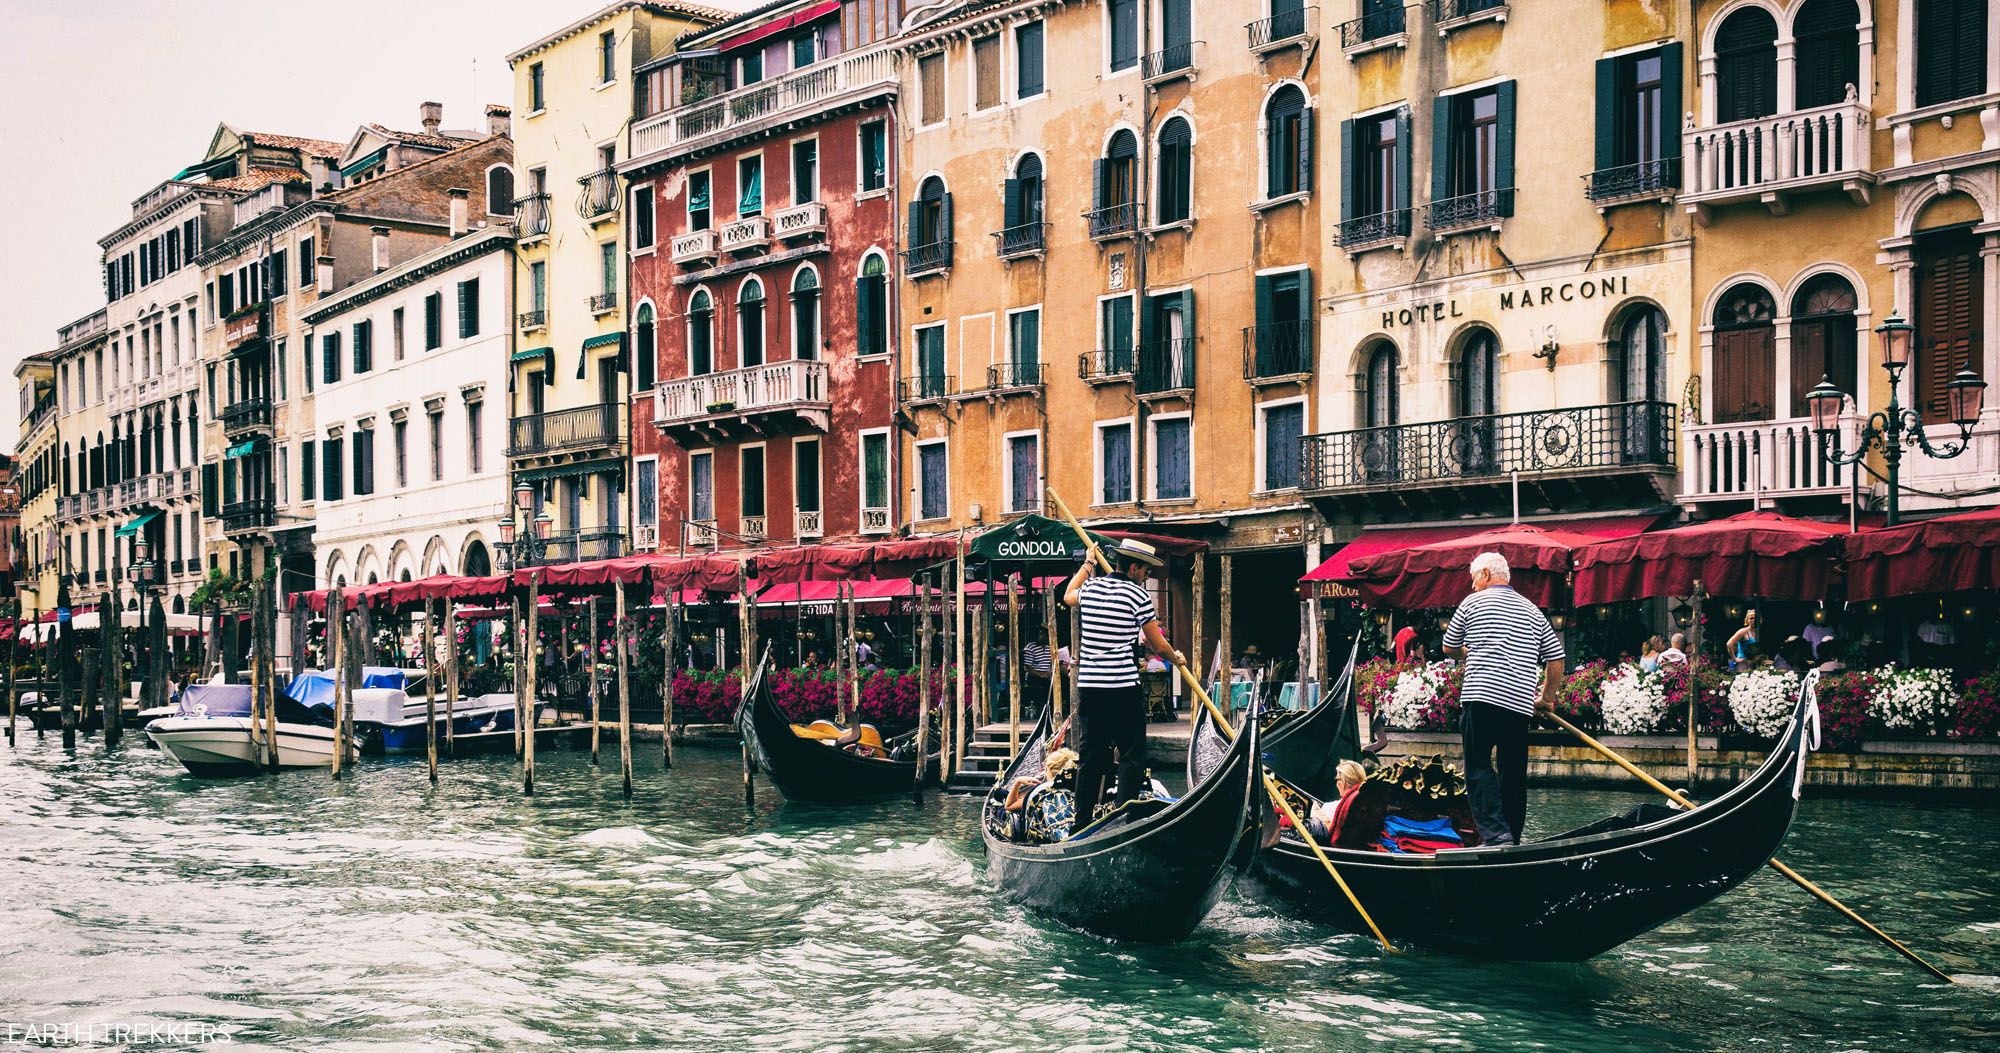 Featured image for “Where to Stay in Venice: Best Hotels and Neighborhoods for Your Budget”